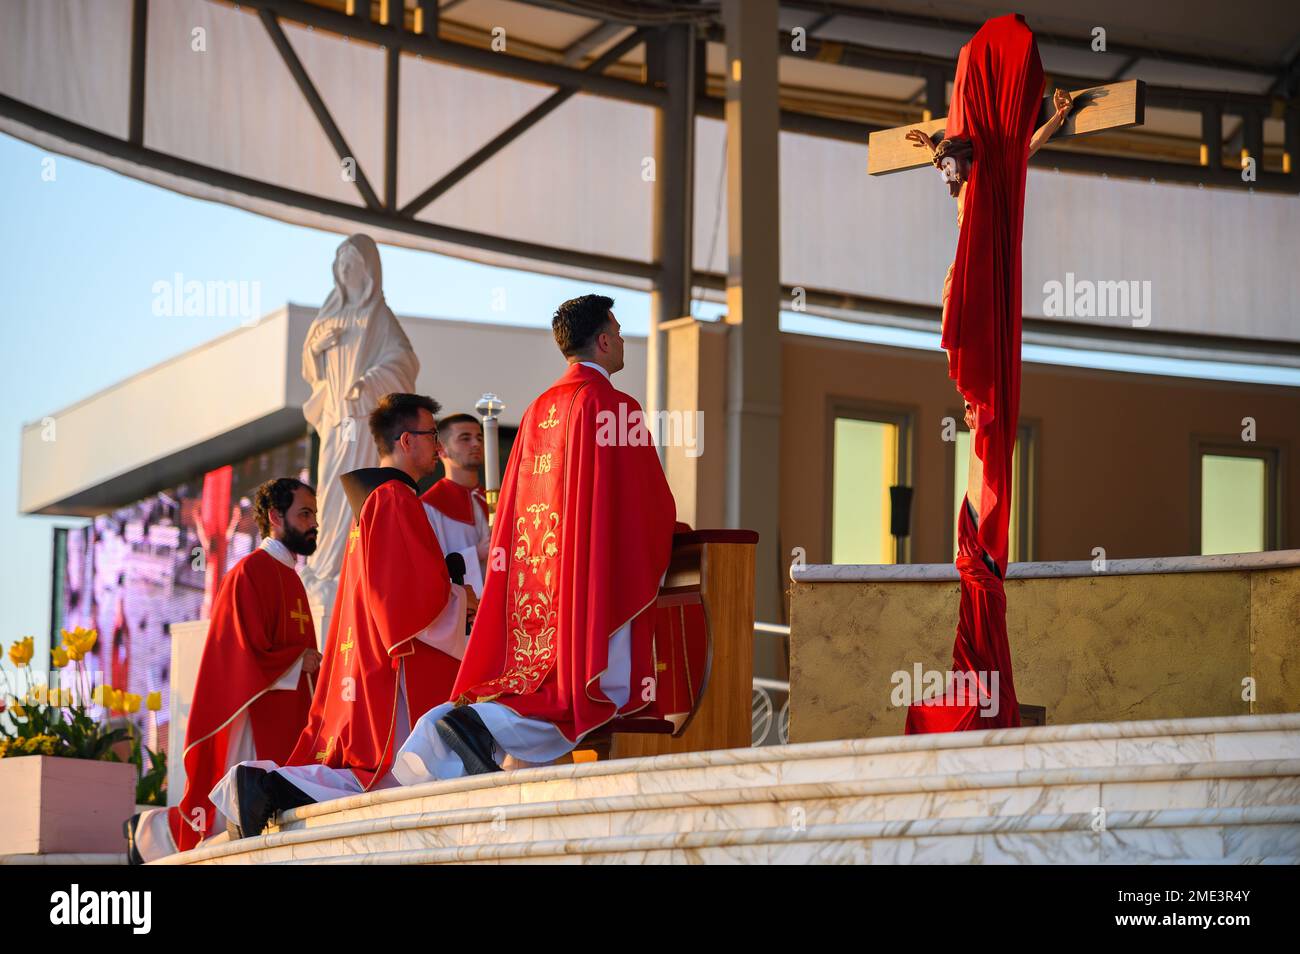 Uncovering and veneration of the Holy Cross on Good Friday in Medjugorje. Stock Photo